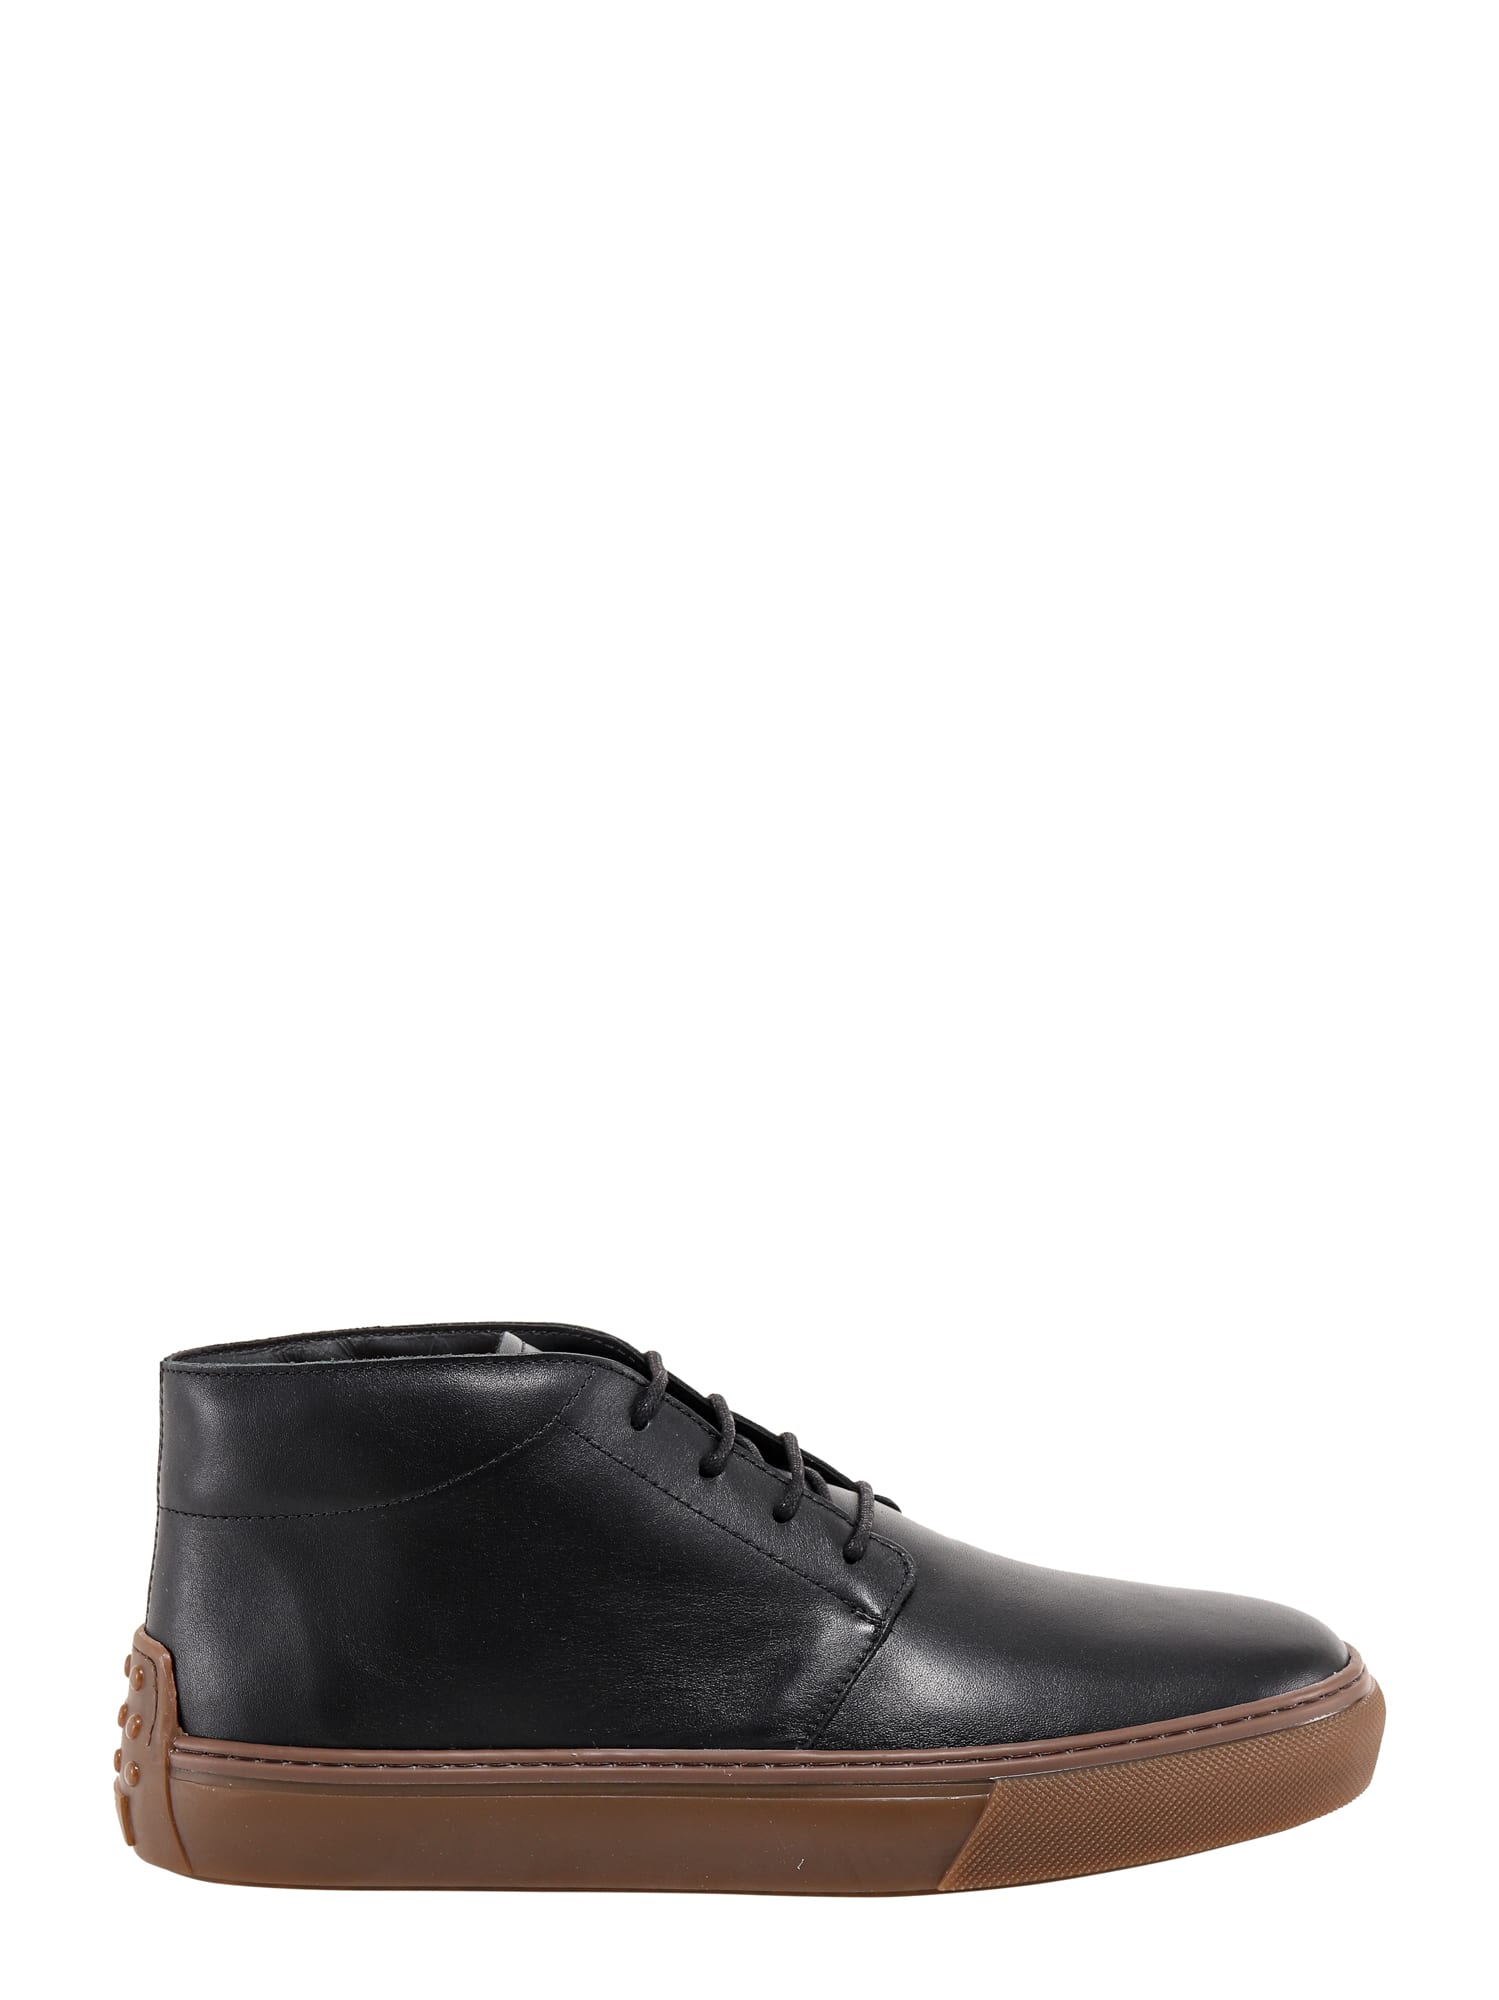 Tods Lace-up Shoe